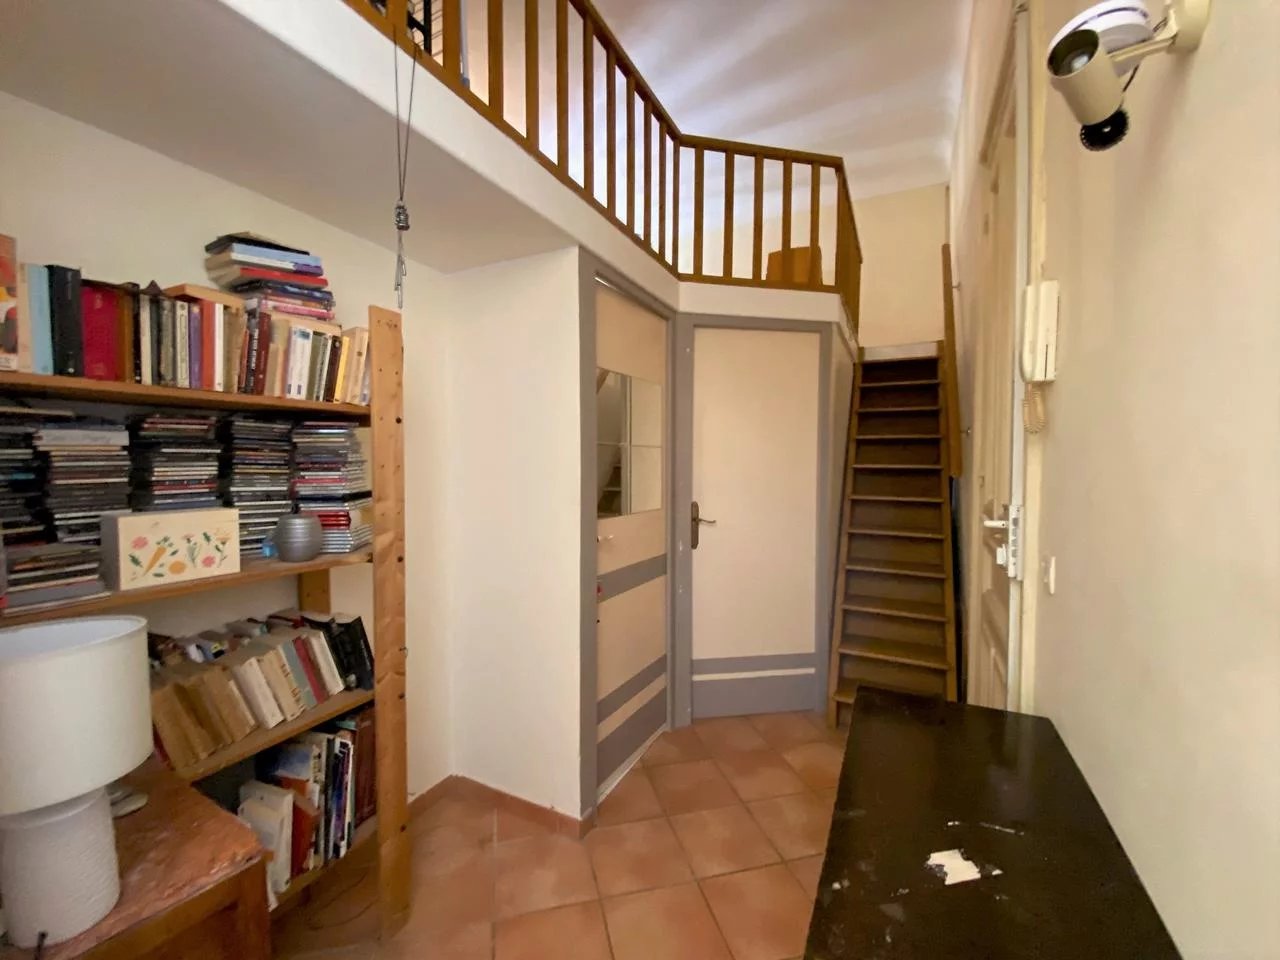 Appartement  2 Rooms 30m2  for sale   279 000 €